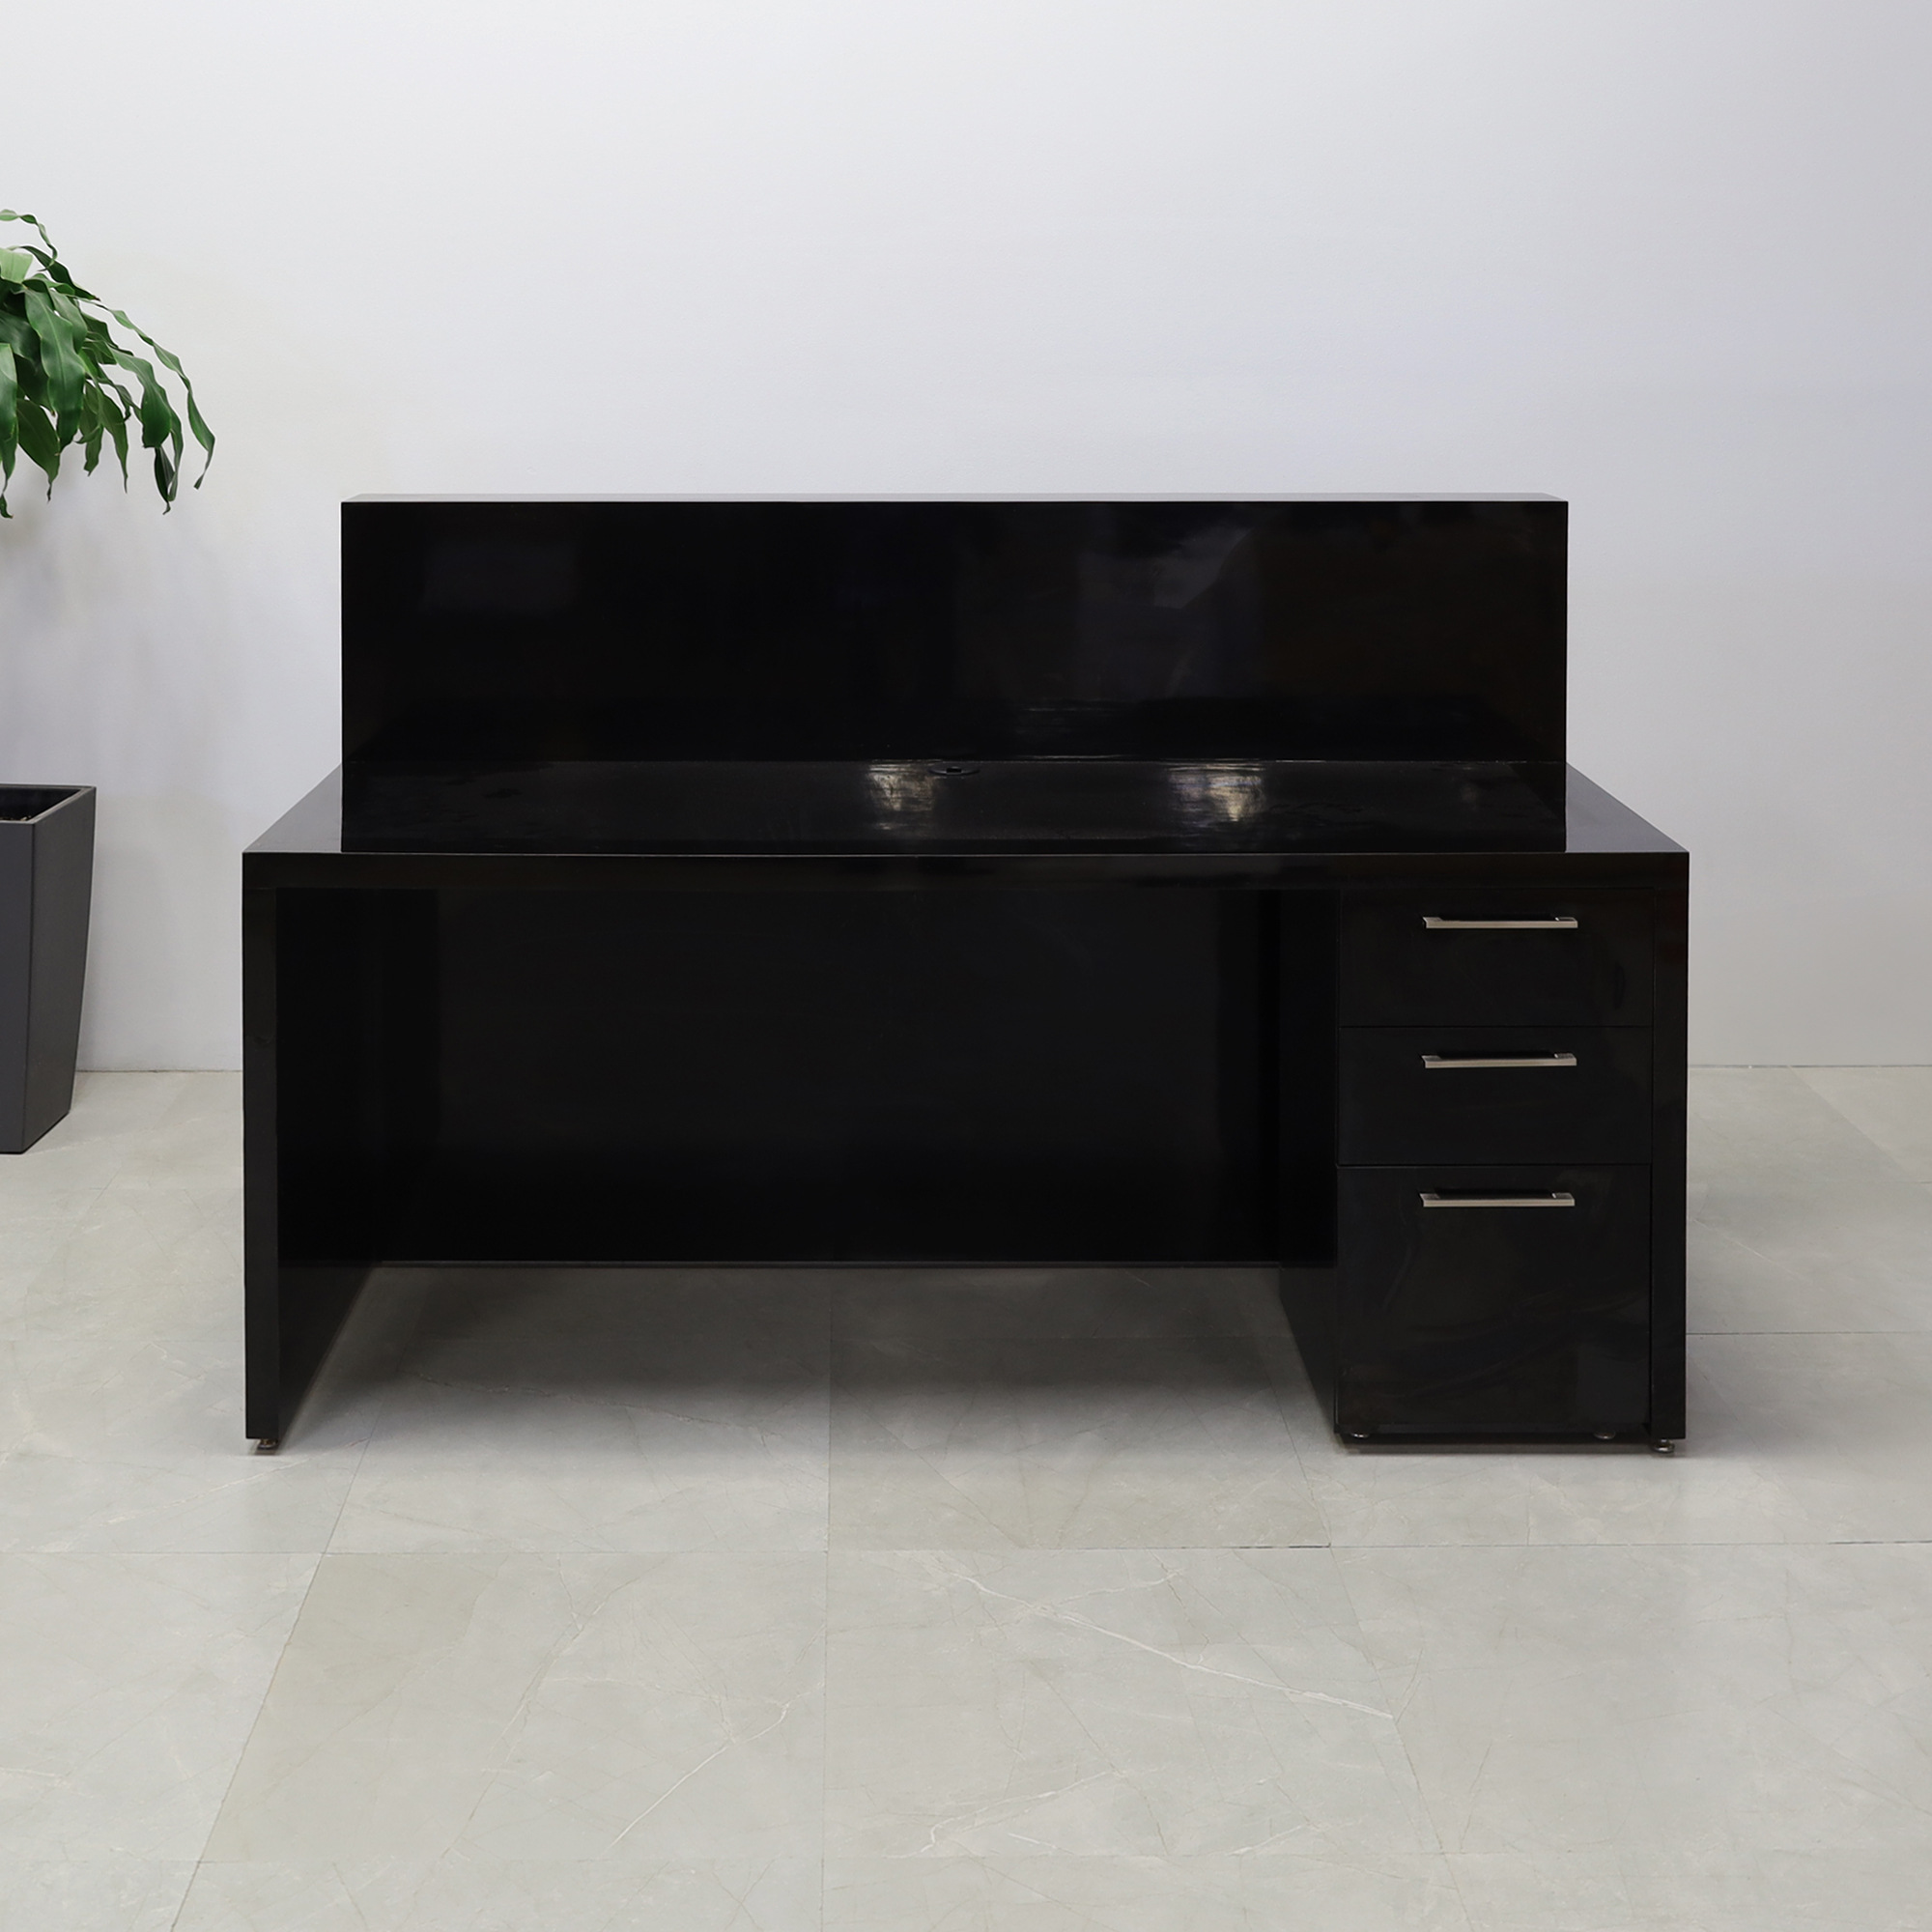 72-inch Dallas Straight Custom Reception Desk in black gloss laminate main desk and toe-kick, and built-in storage on right side when sitting, shown here.